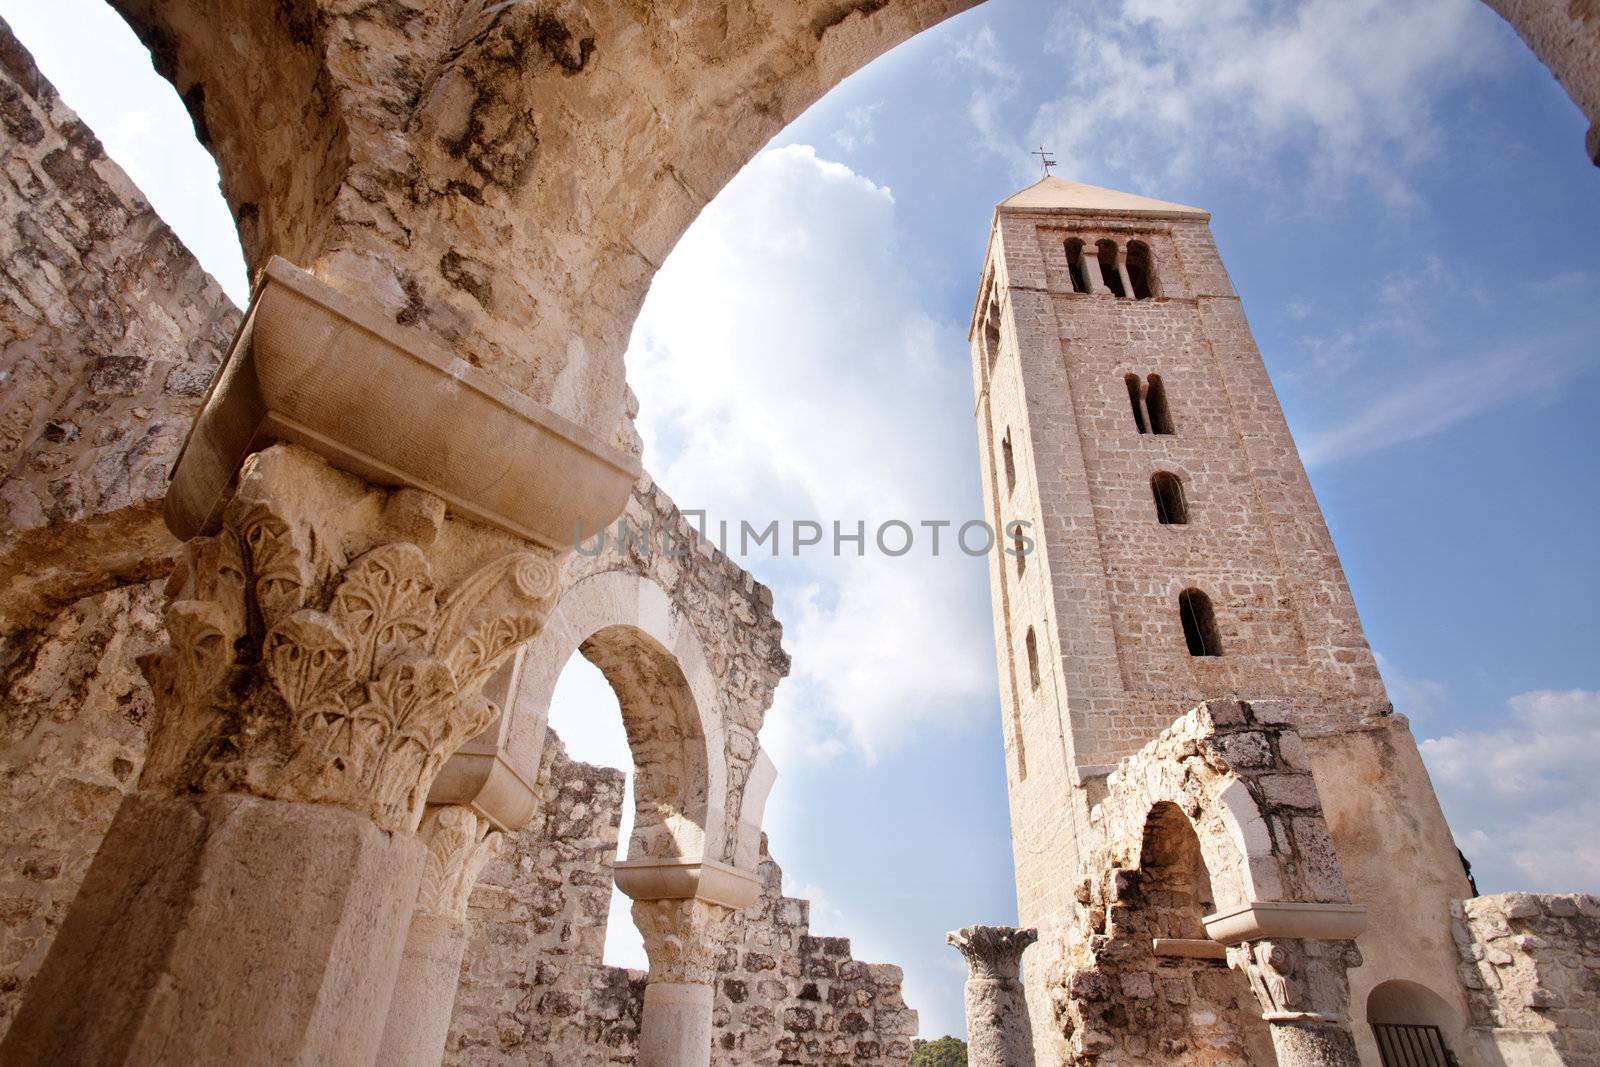 Ruins of the Church of St. John the Evangelist in Rab Croatia - a popular tourist attraction